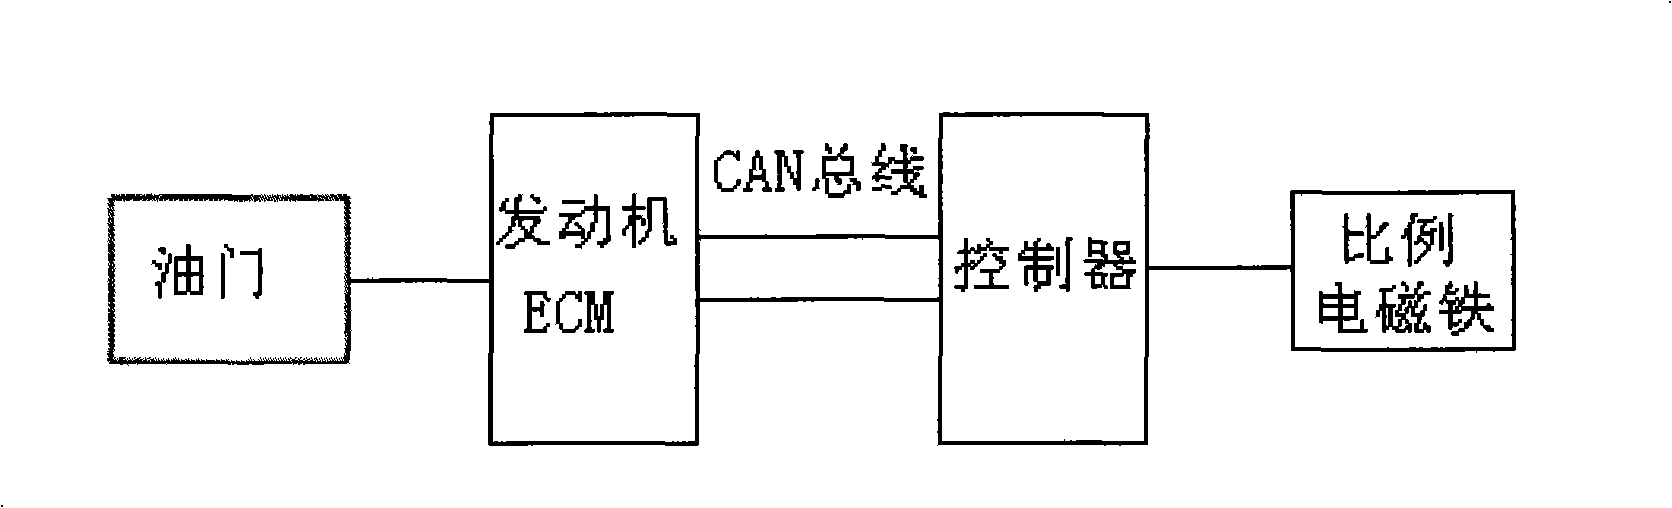 Method for controlling power limit load of caterpillar crane